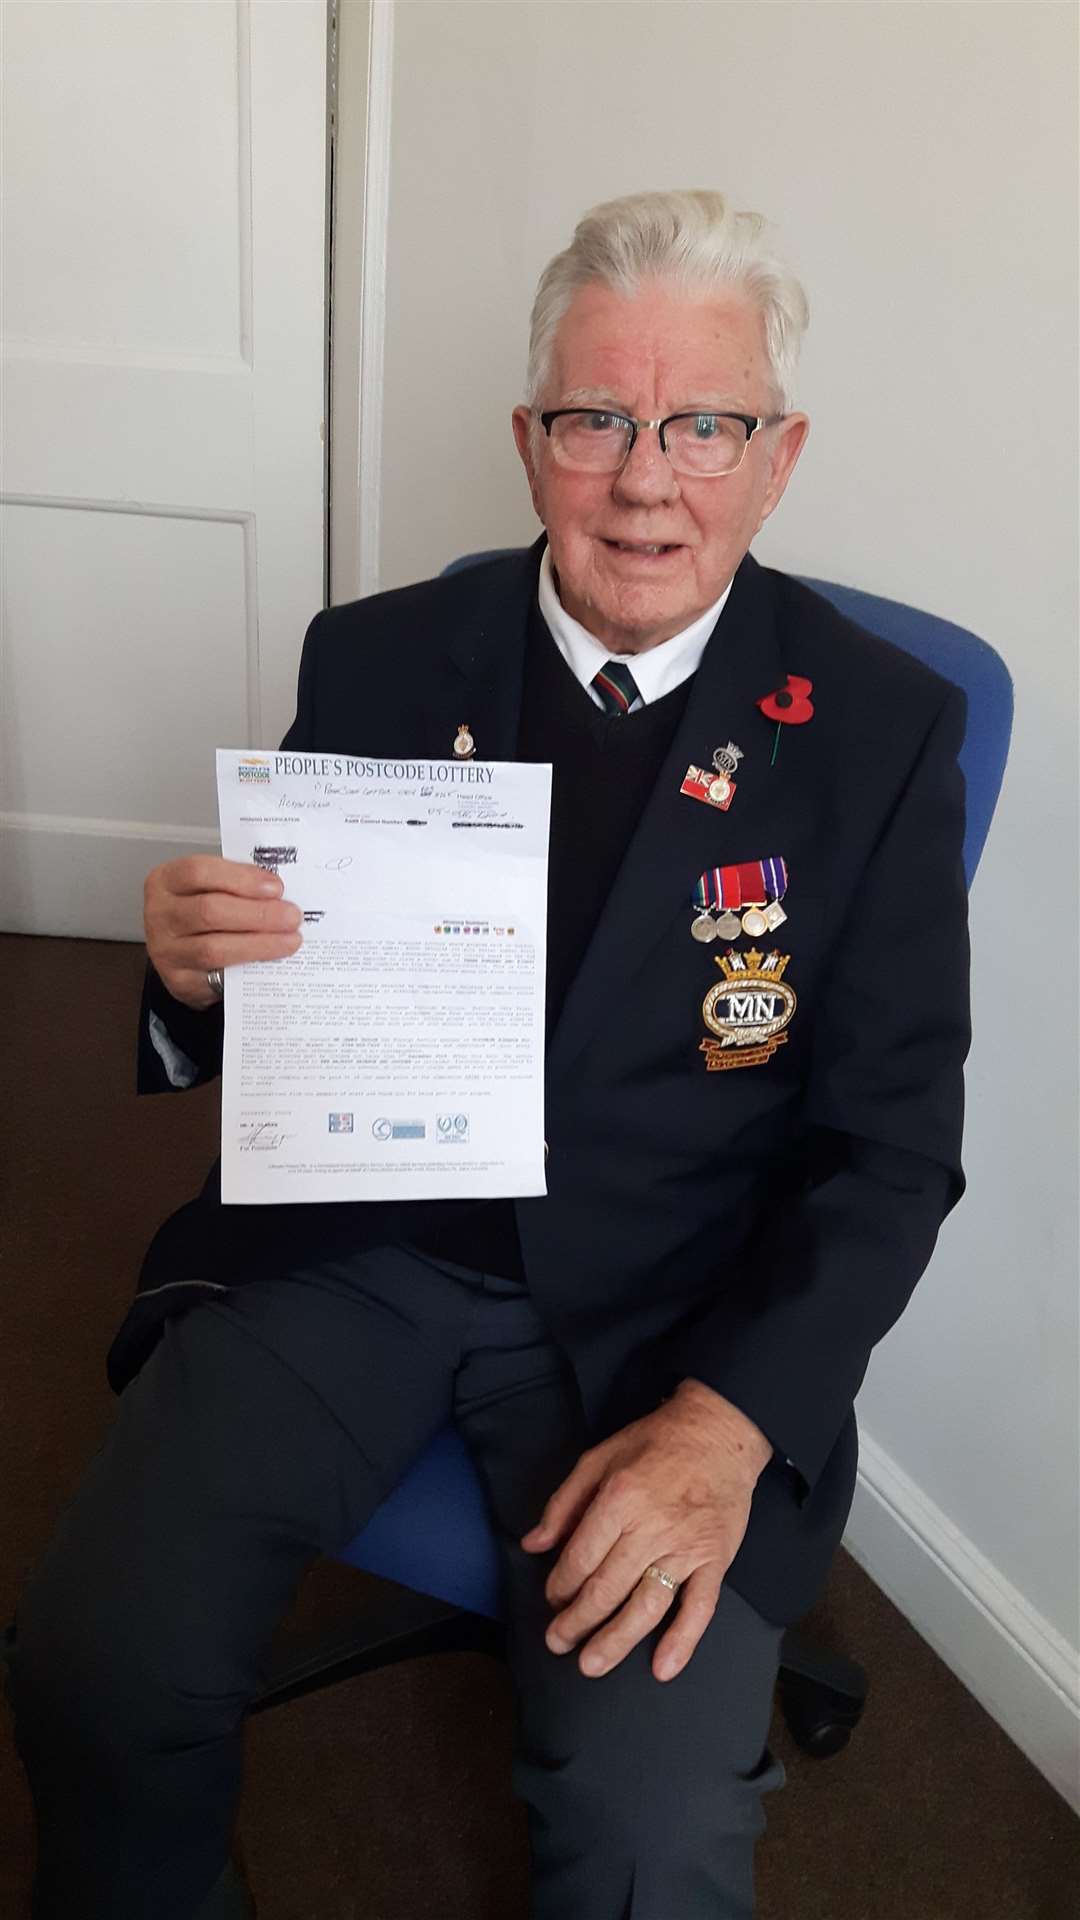 Laurence Stroud, a Merchant Navy veteran of the Cold War, narrowly escaped being conned out of £2,350 by a man pretending he had won the People's Postcode Lottery. He is pictured with the bogus letter